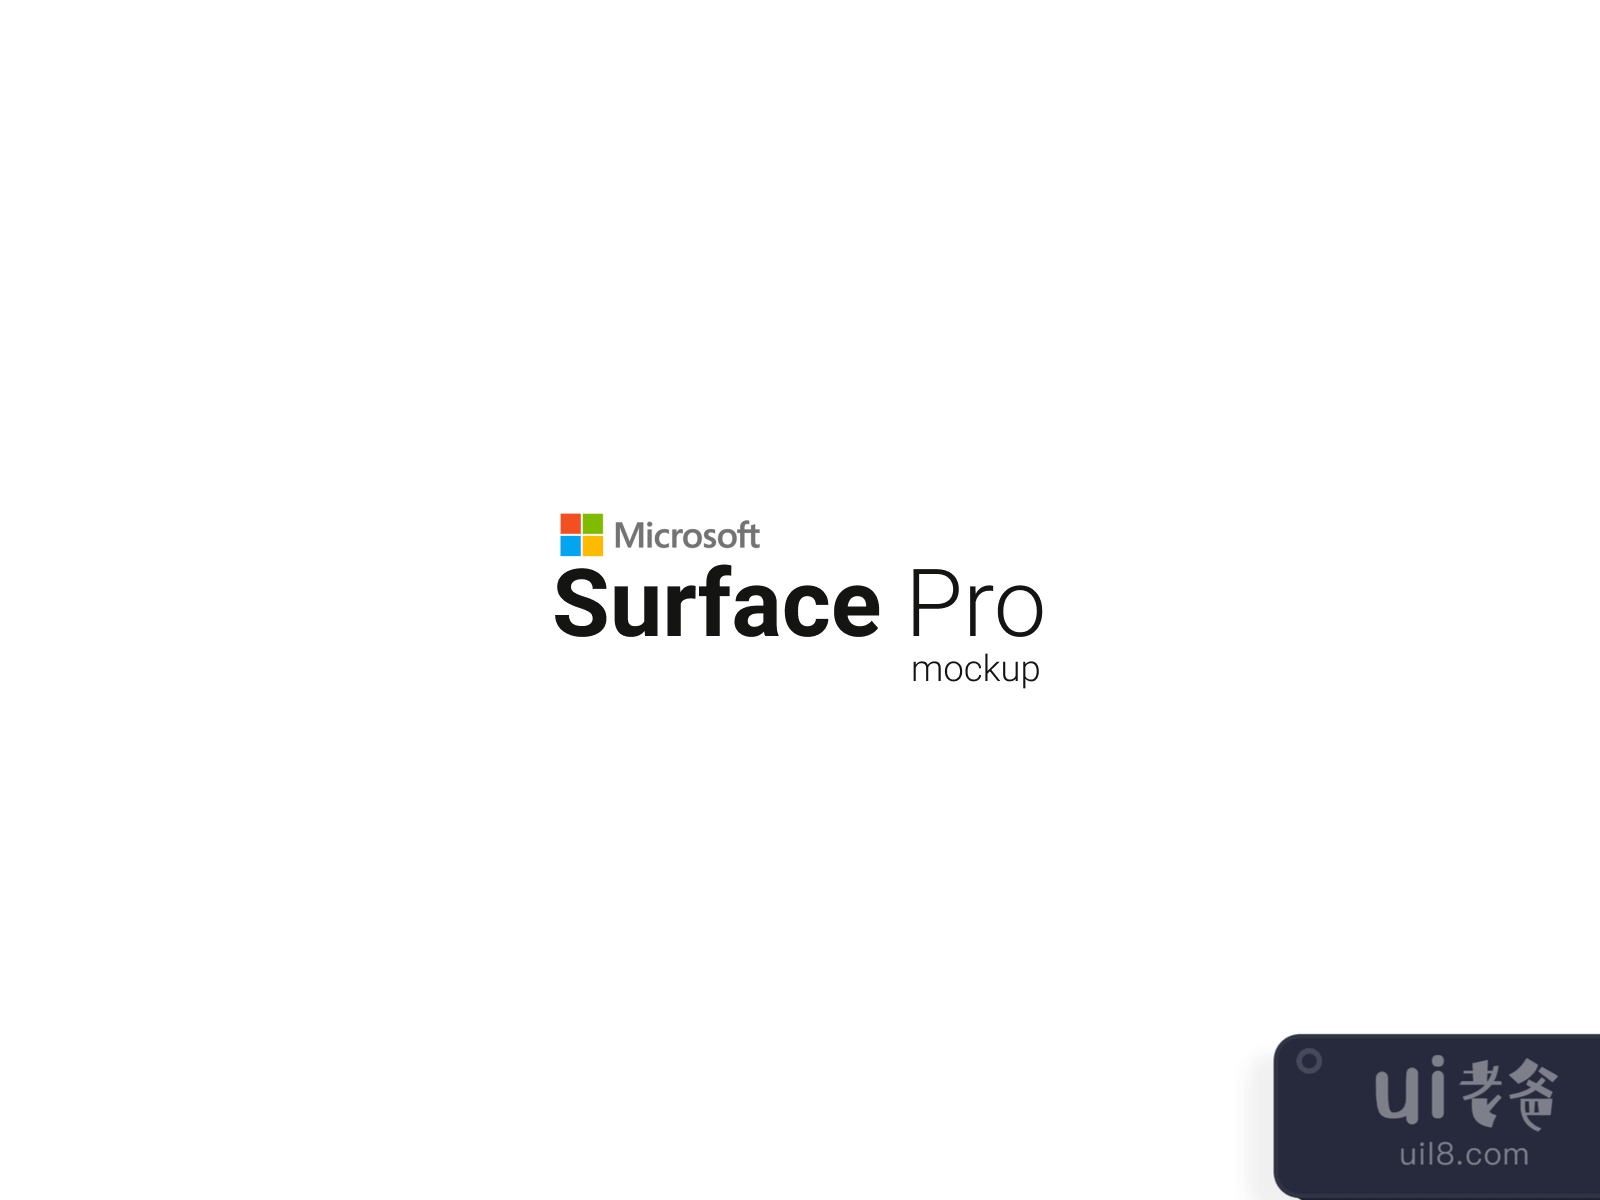 Microsoft Surface Pro 4 Mockup for Figma and Adobe XD No 4